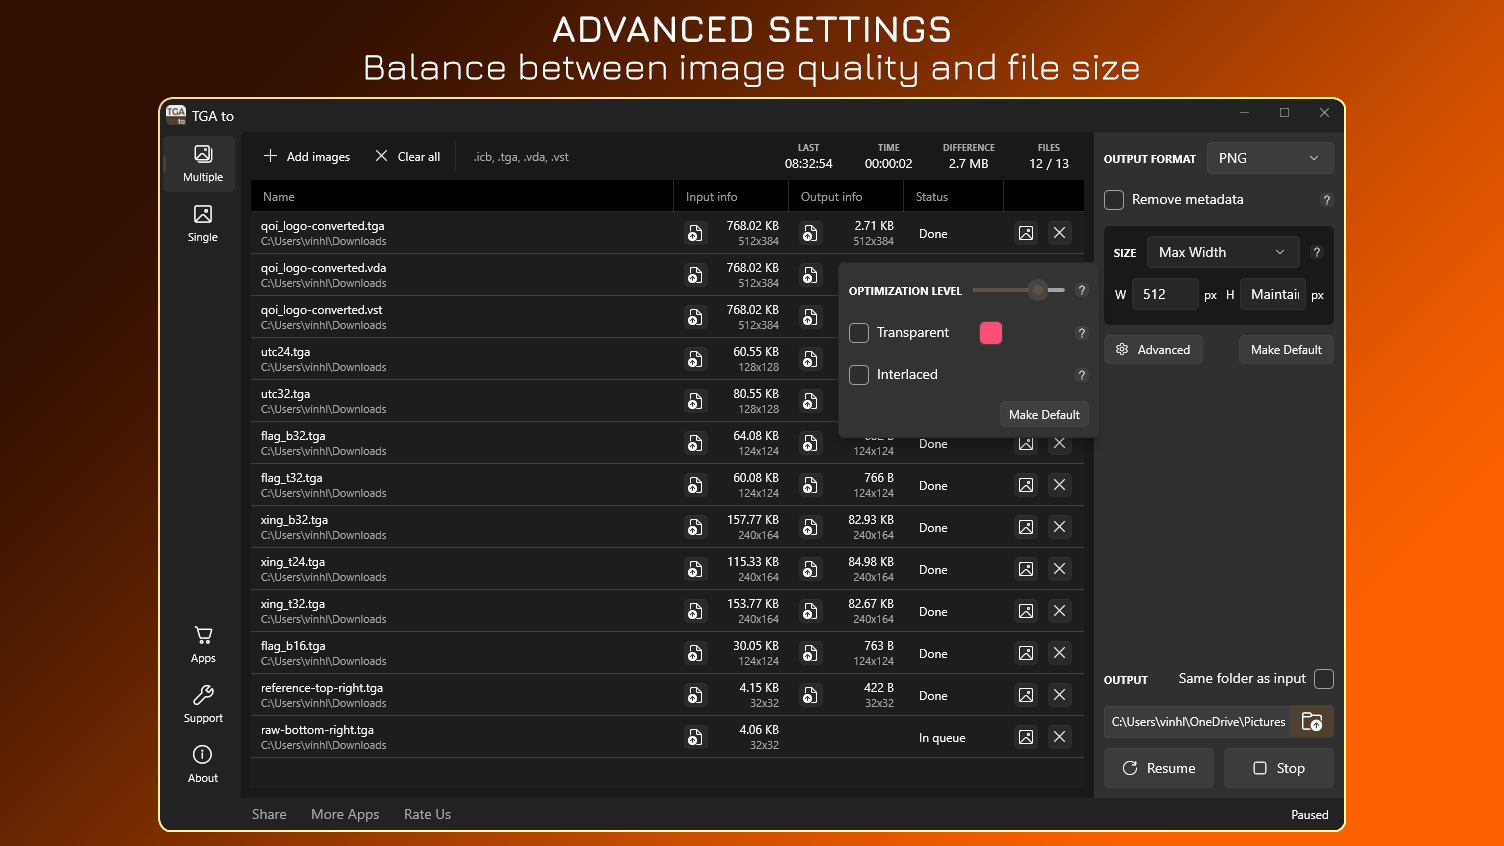 Advanced Settings - Balance between image quality and file size.